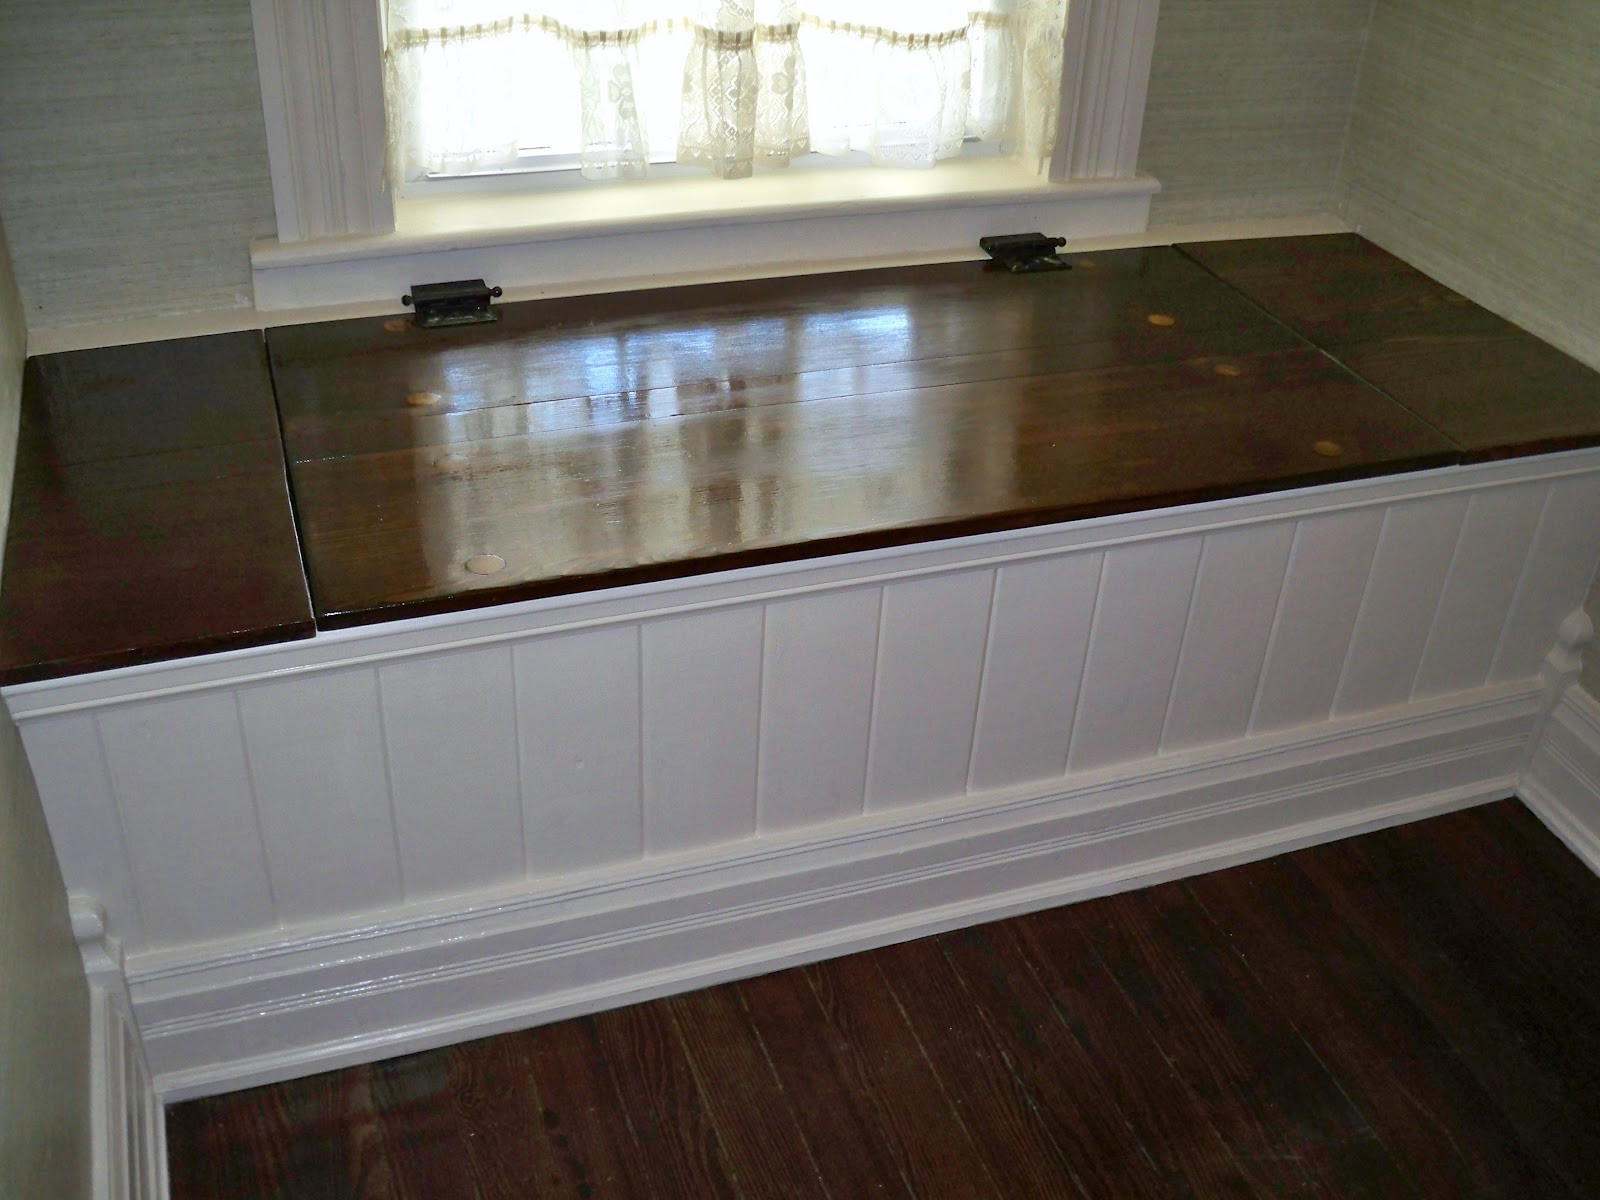 Built In Storage Bench Seat
 The Country HomeKeeper Window Seat with Built in Storage